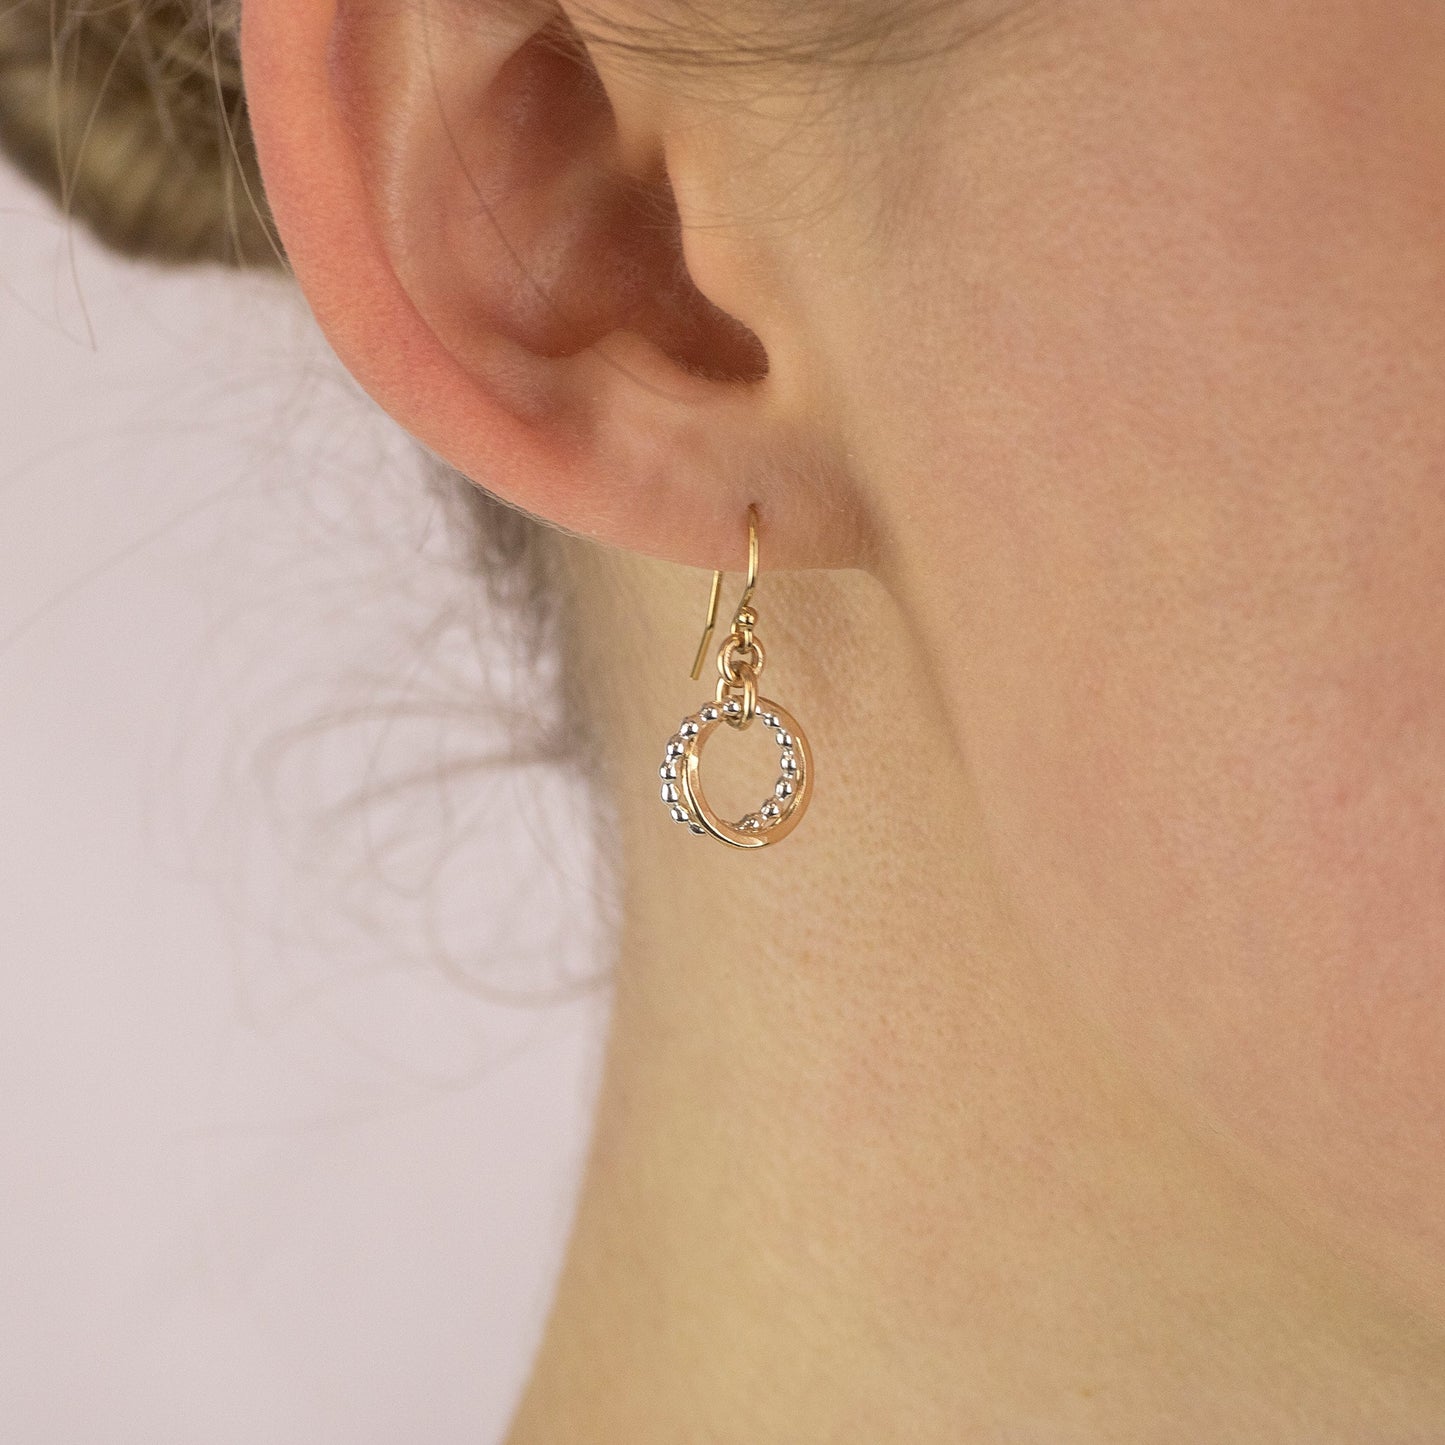 Mother Daughter Gift - Love Knot Earrings - Linked for a Lifetime